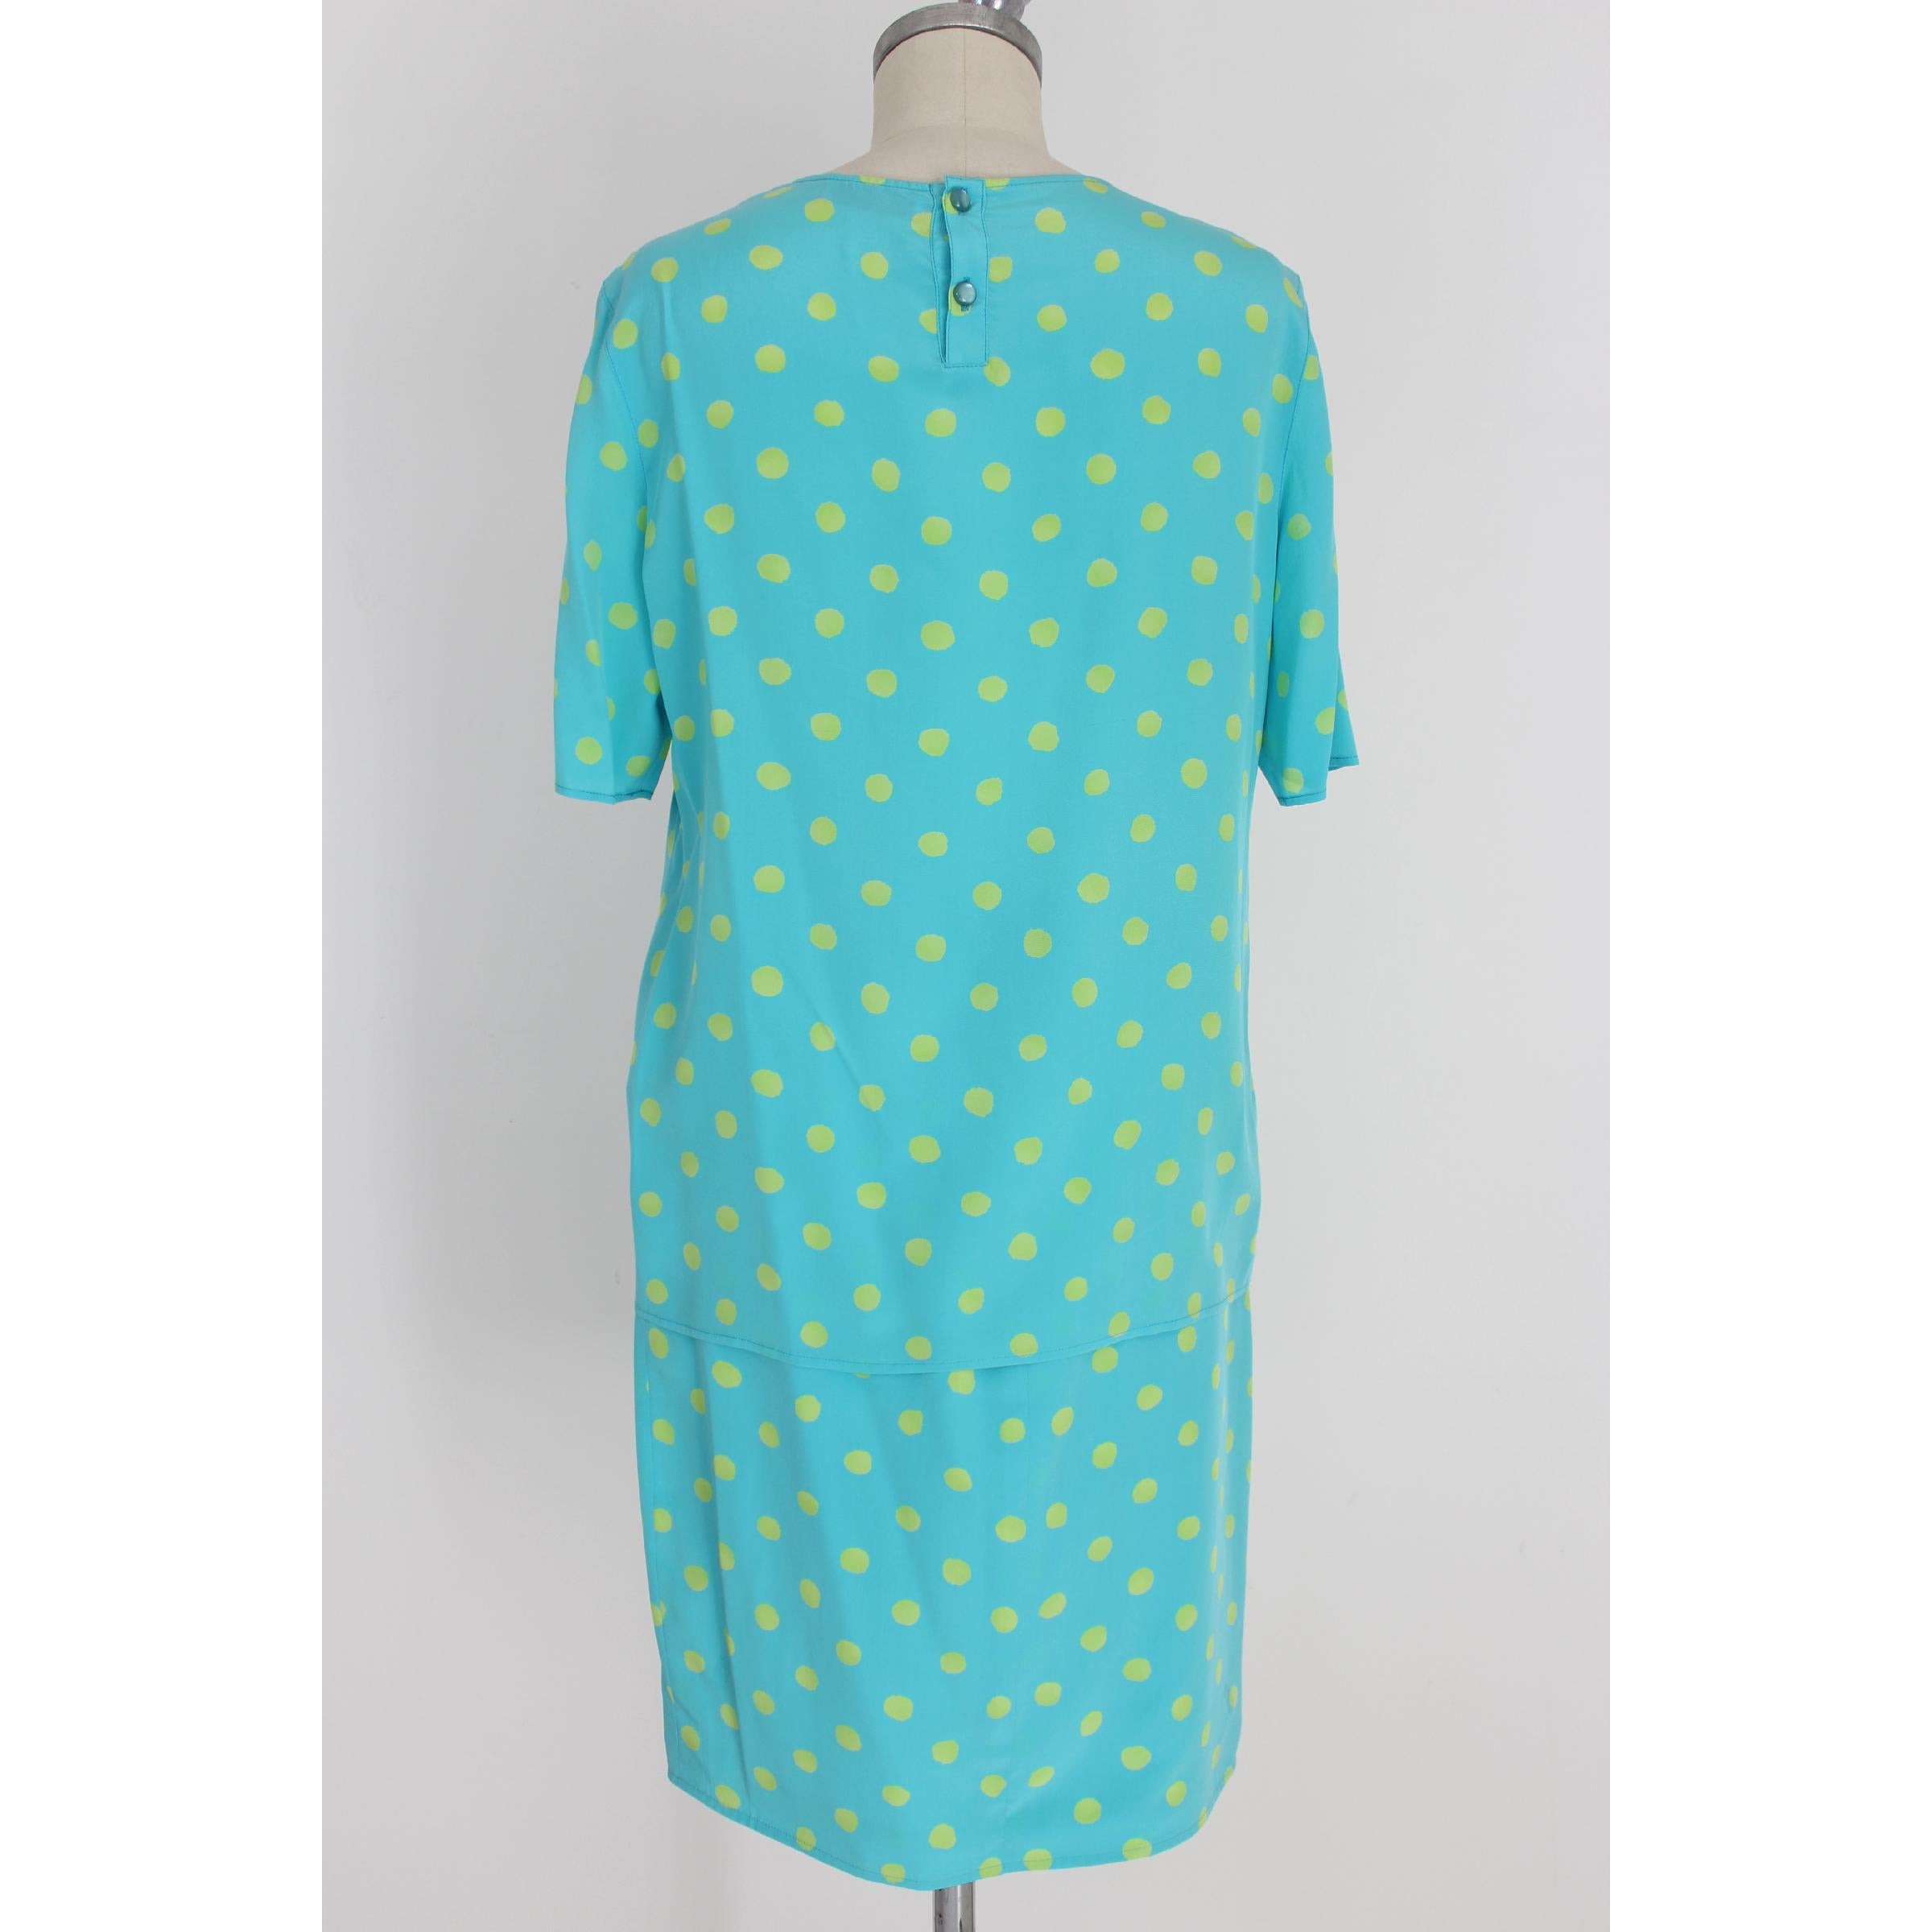 Emanuel Ungaro 90s vintage women's skirt suit. Complete shirt and skirt with polka dots , 100% silk , light blue and yellow. Wallet skirt, soft knit with short sleeves. Made in Italy. Excellent vintage condition.

Size: 44 It 10 Us 12 Uk

Shoulder: